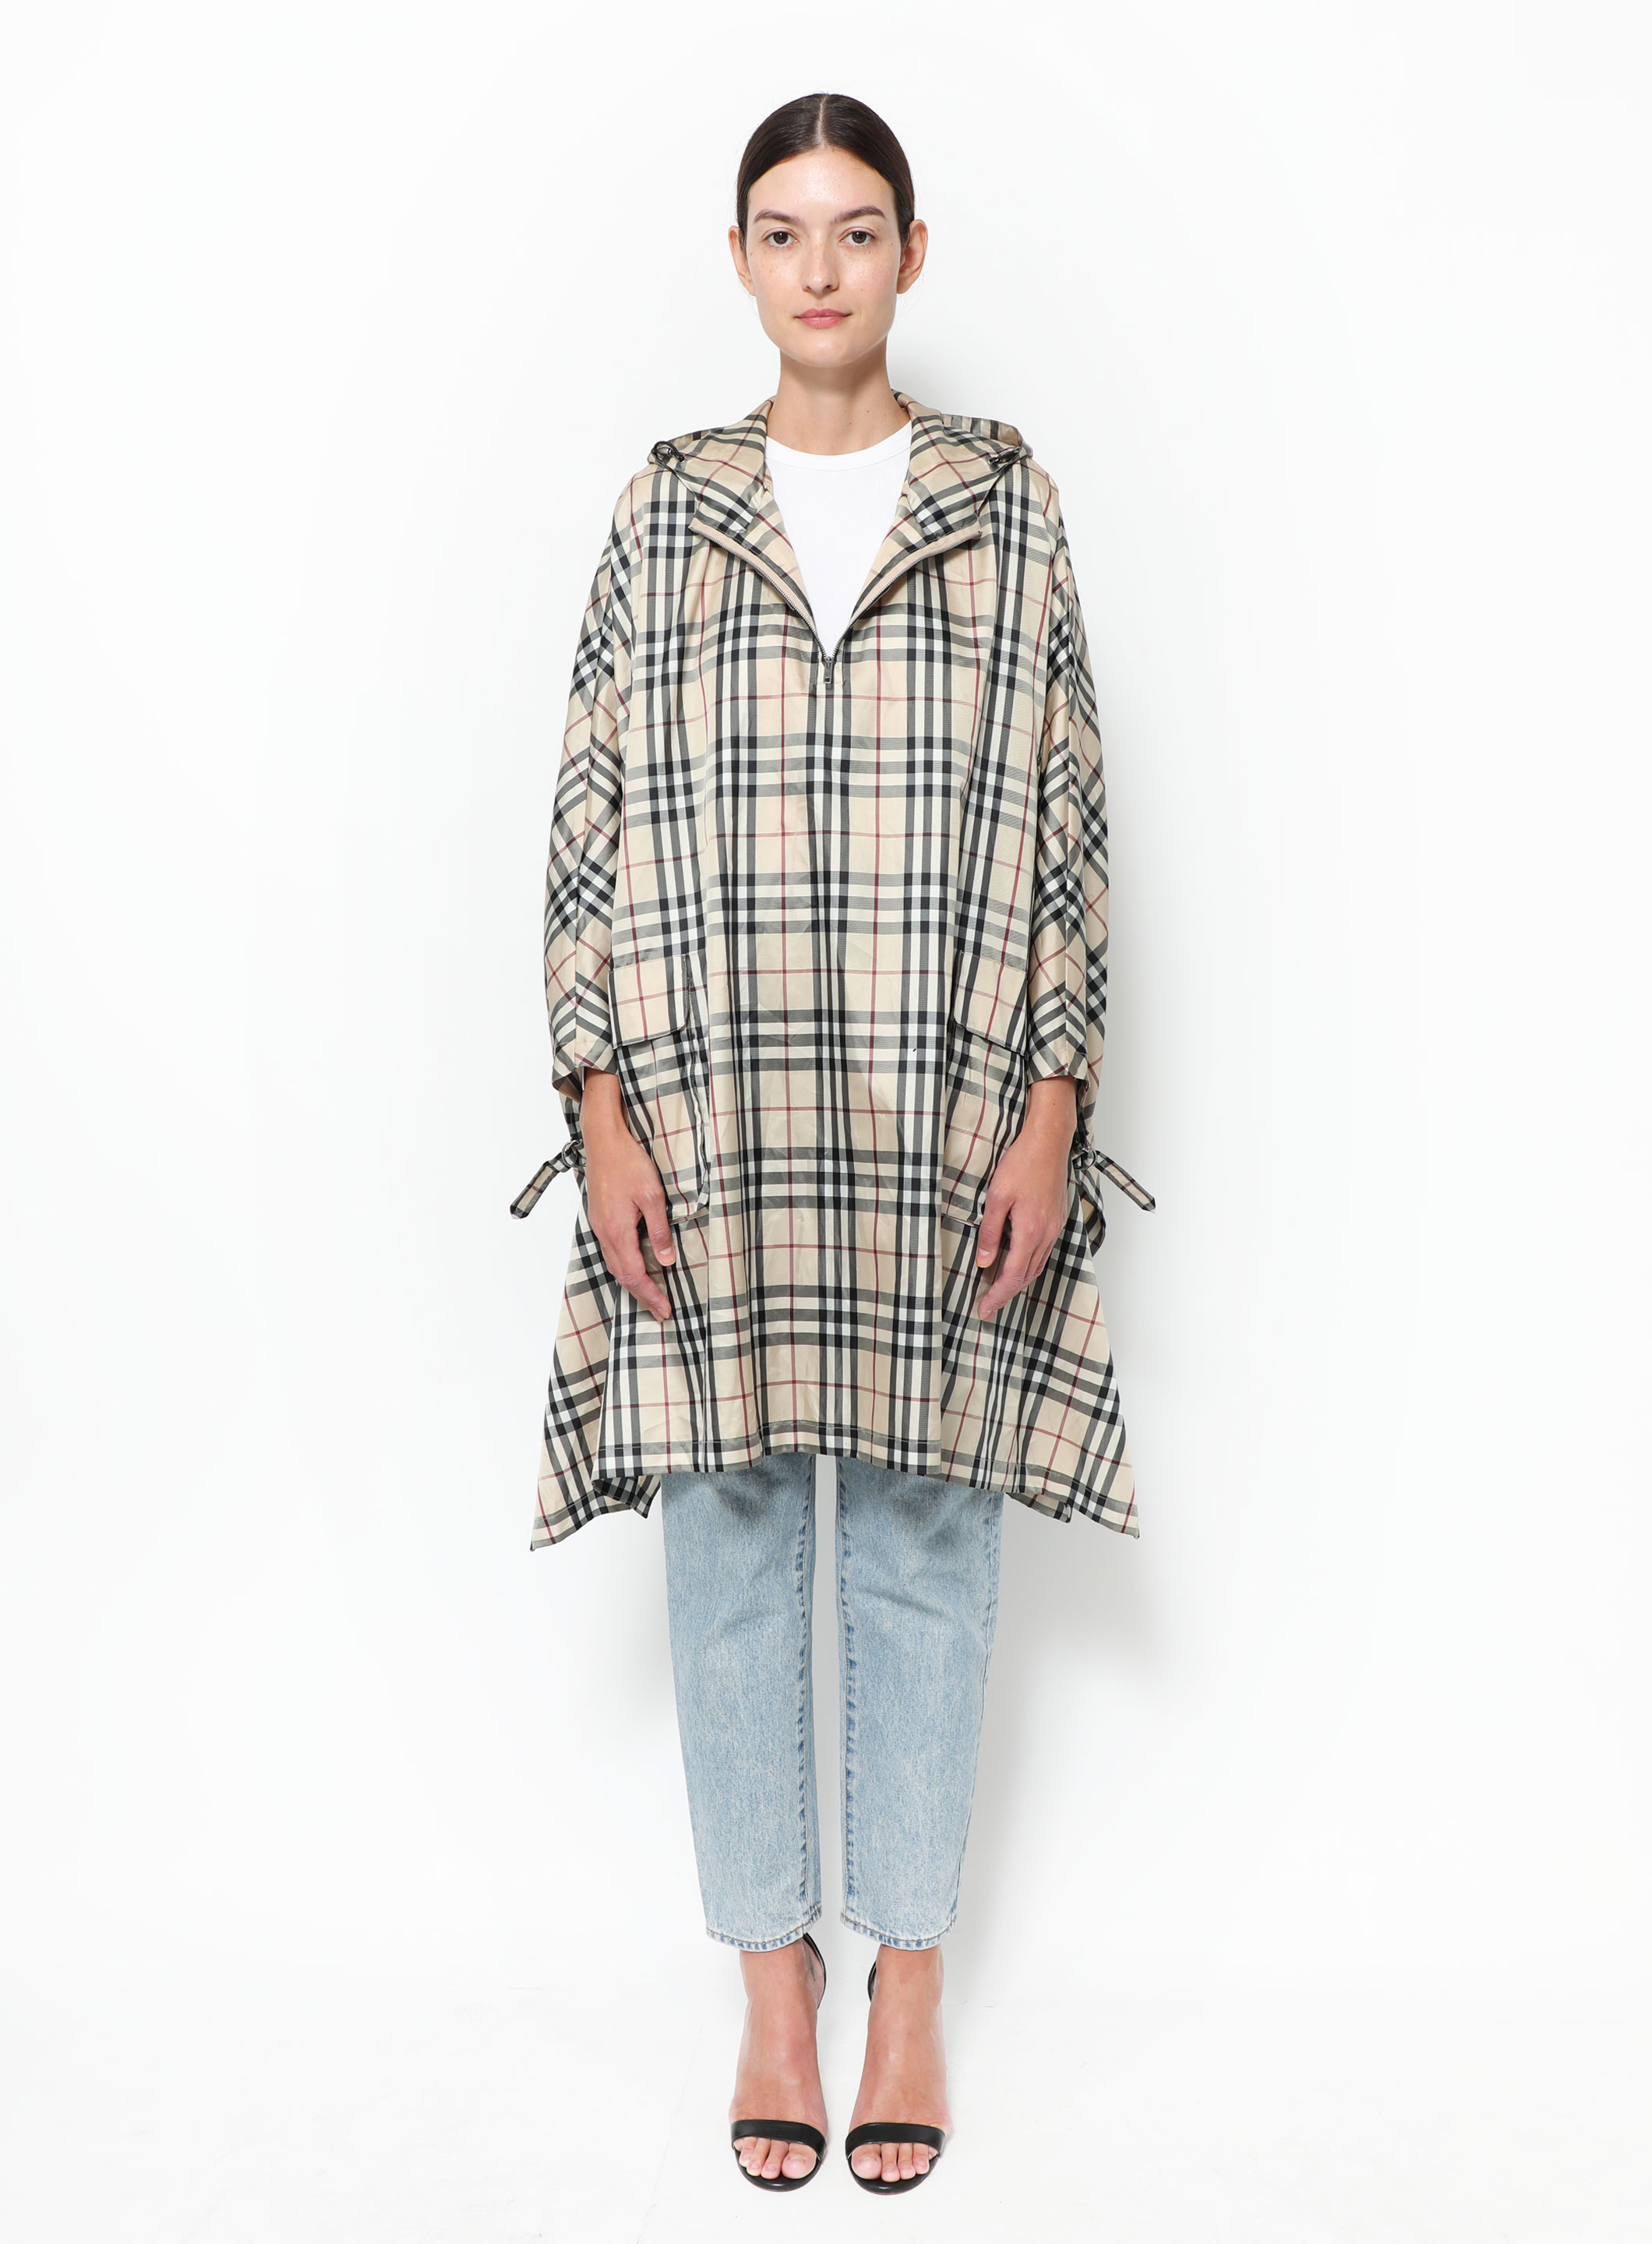 Beige Poncho with Burberry Plaid Rainboots nd Louis Vuitton Bag